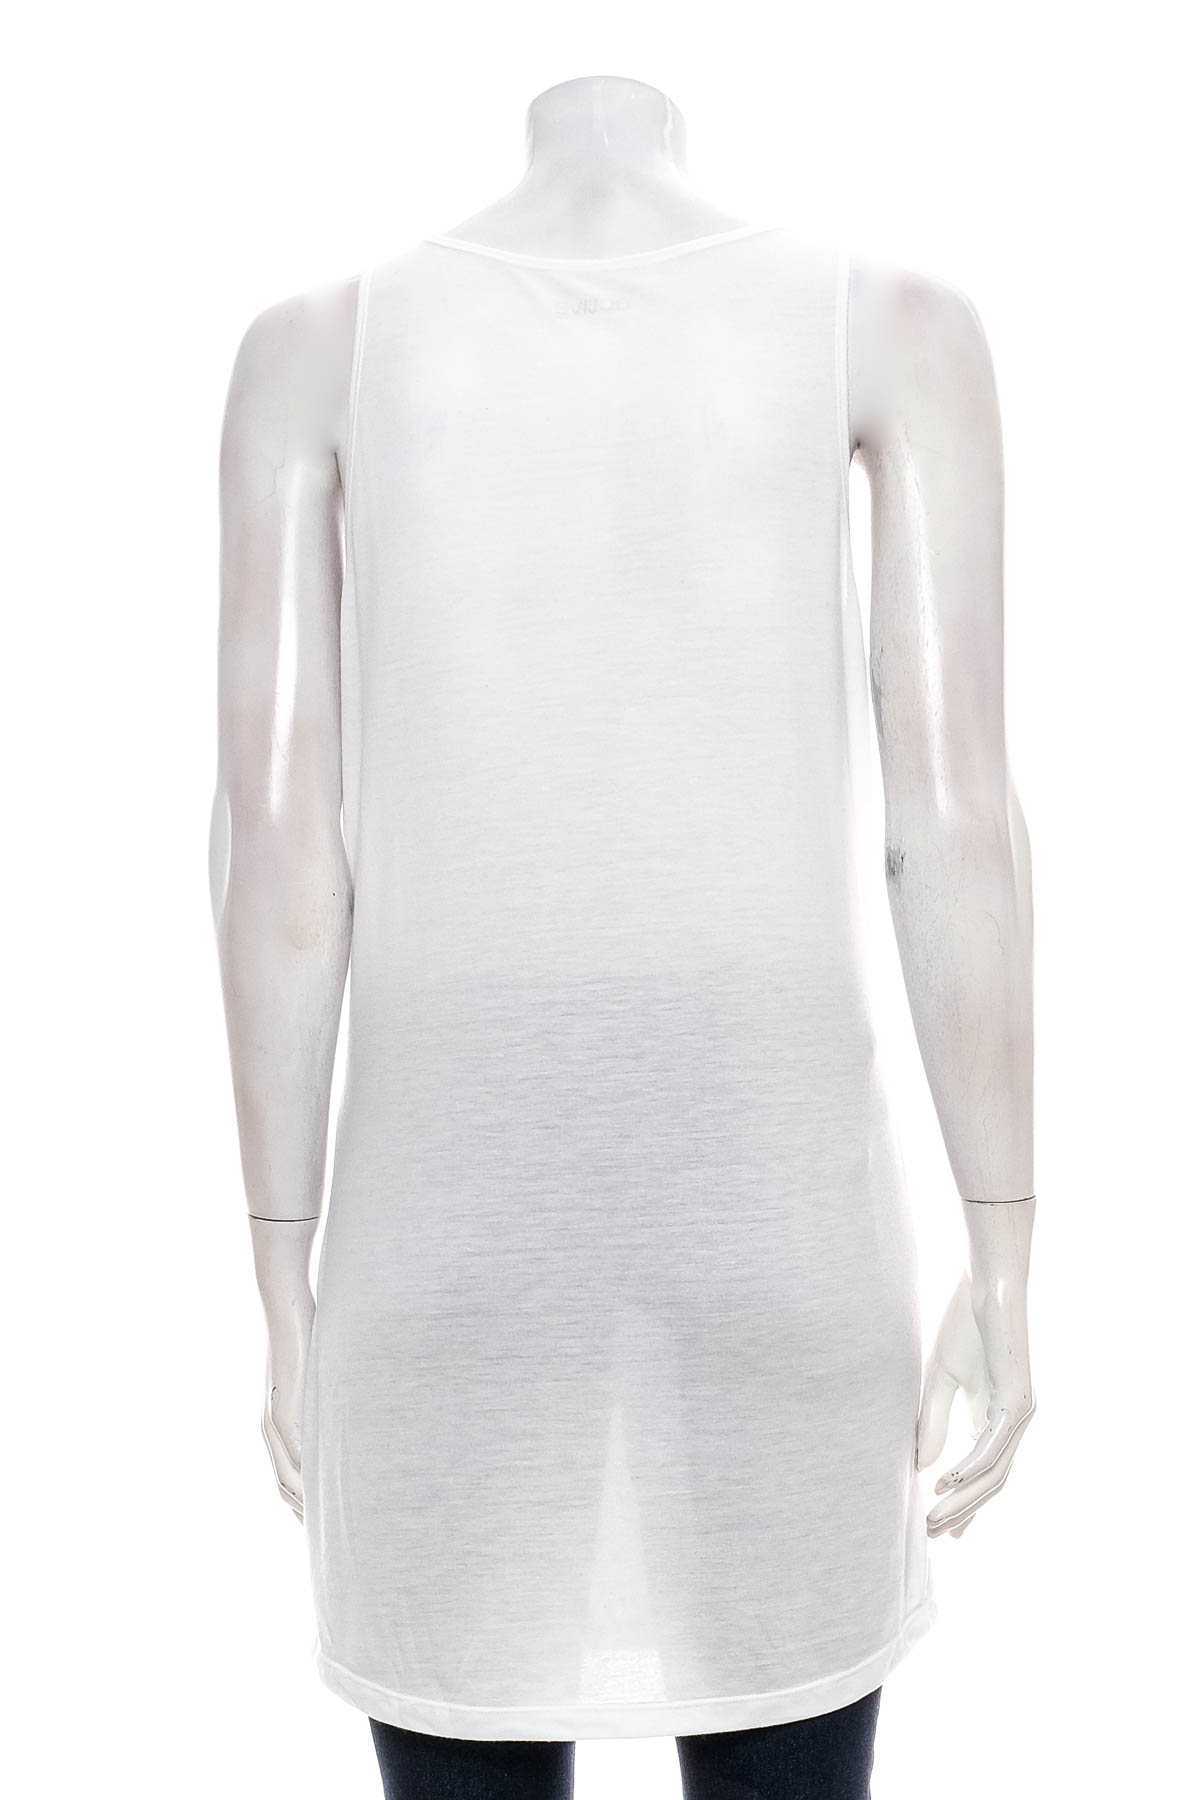 Women's tunic - Active by Tchibo - 1